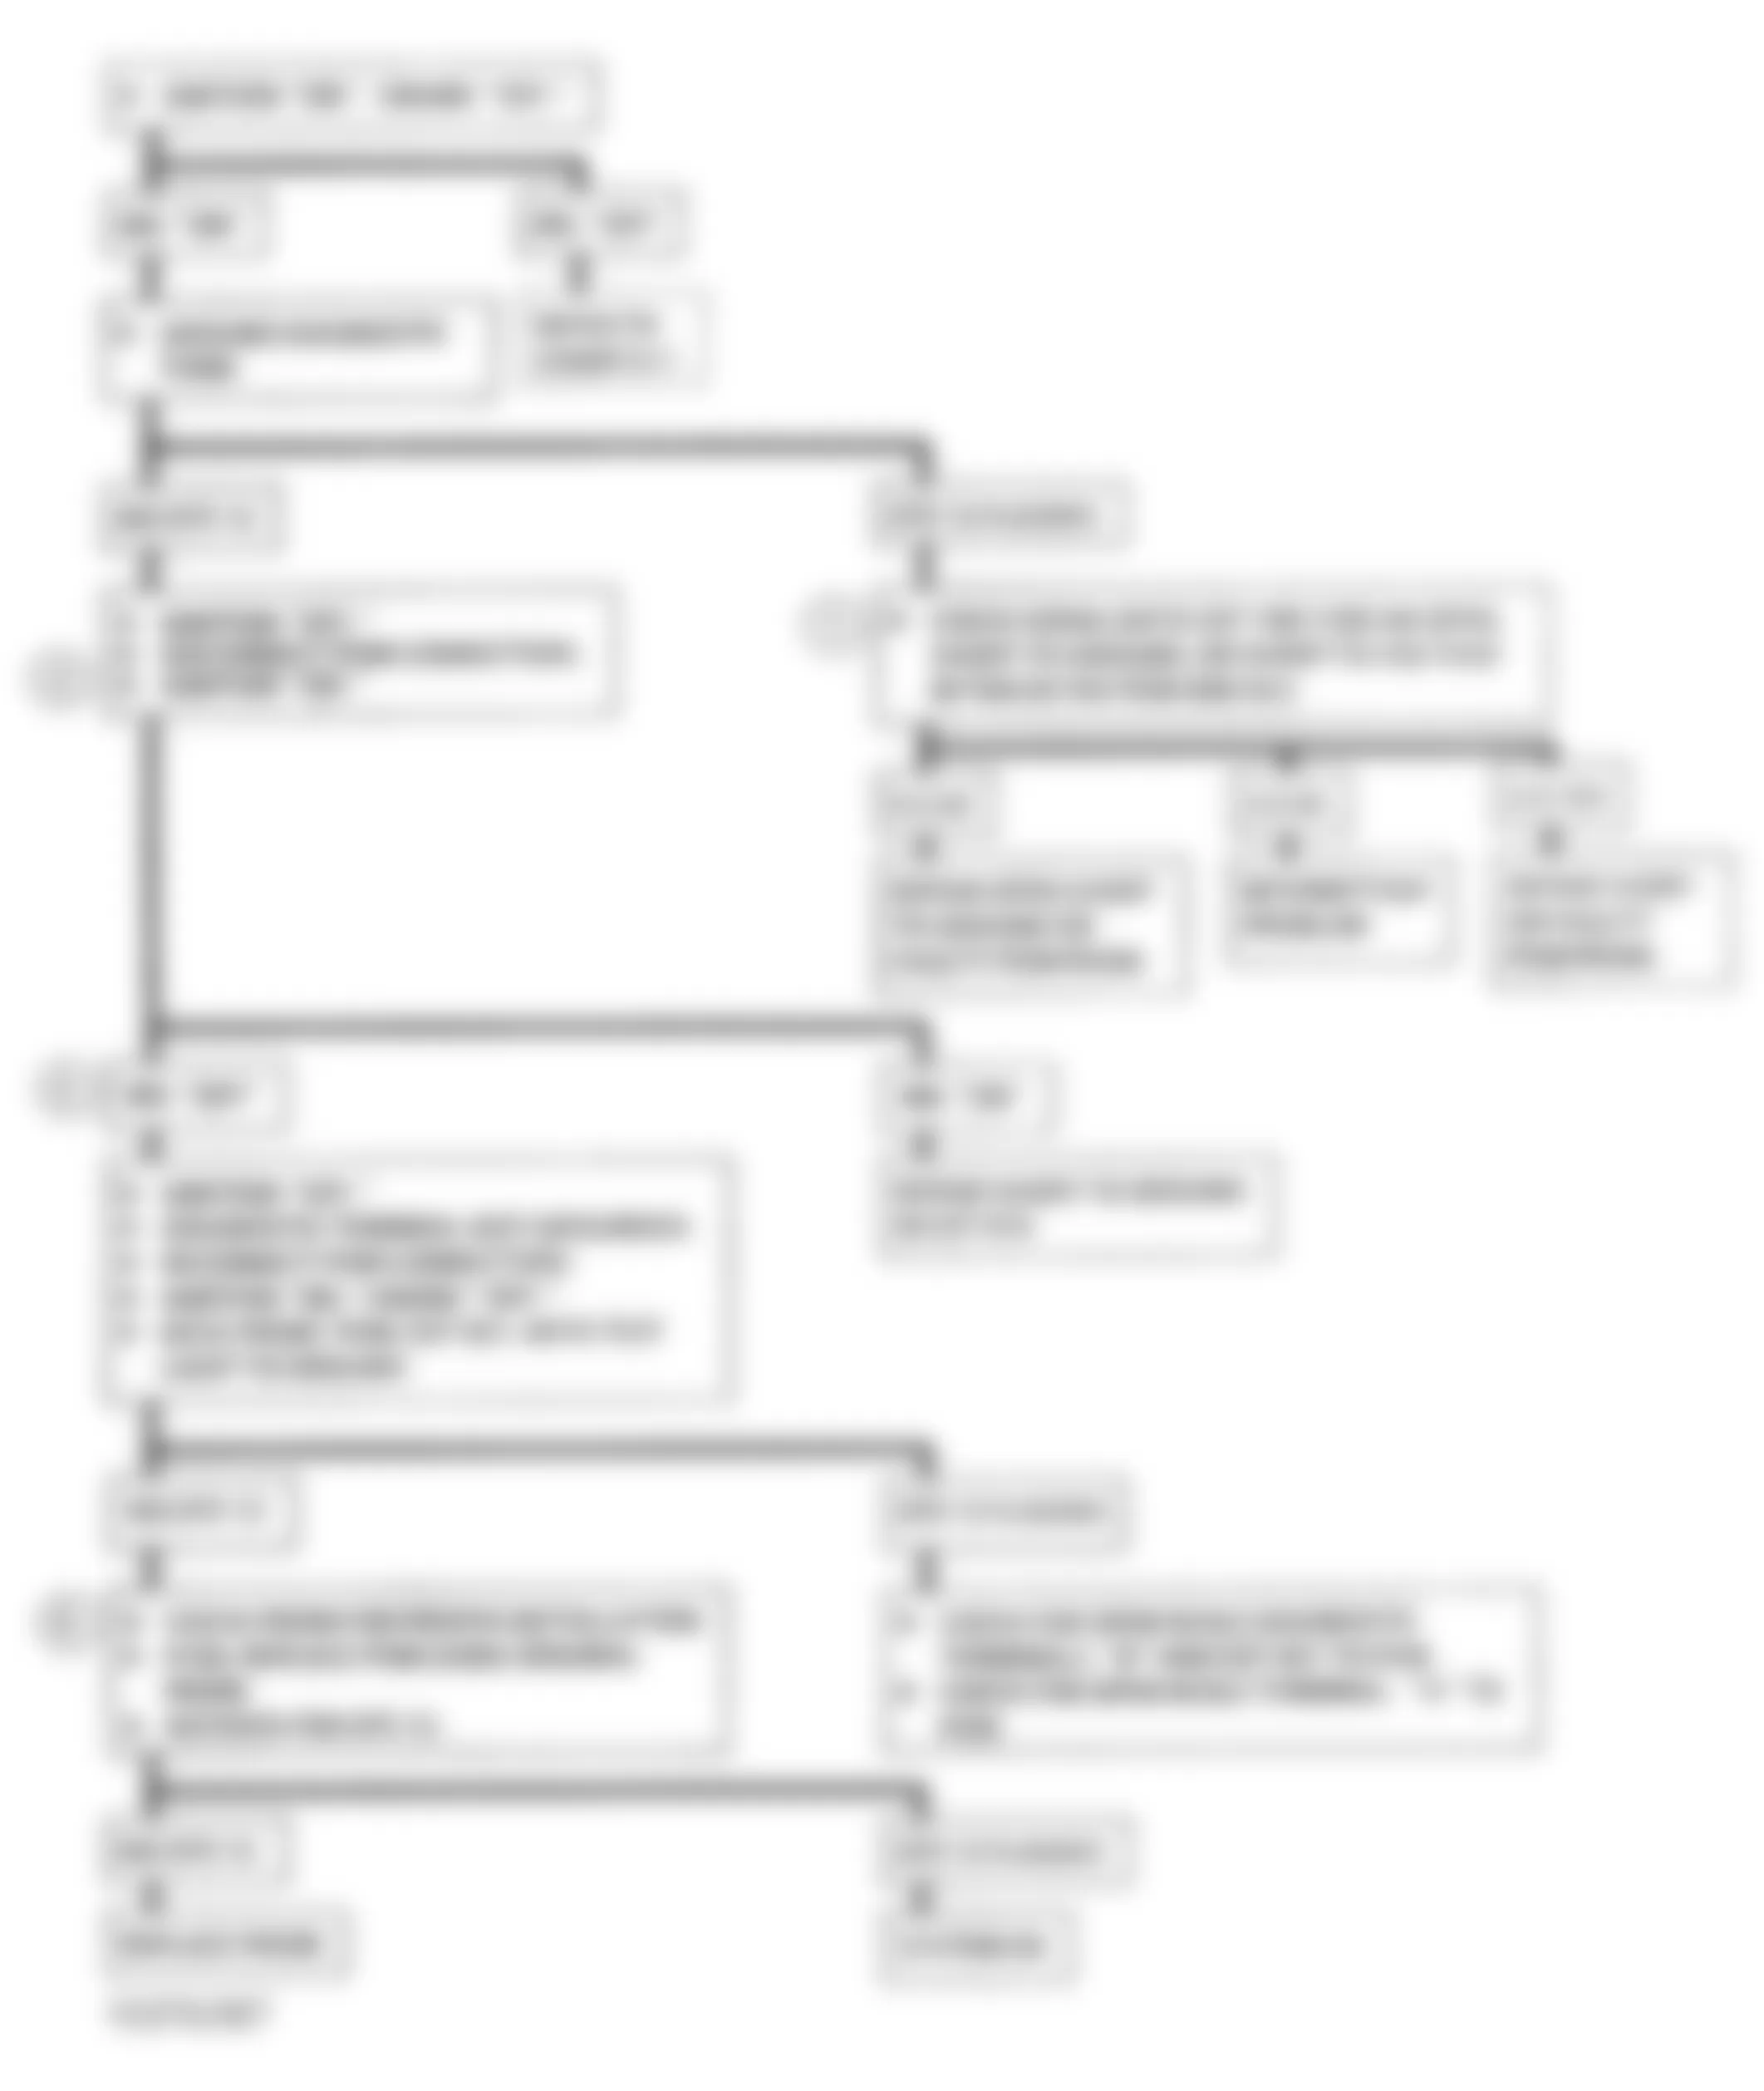 Chevrolet Chevy Van G10 1993 - Component Locations -  A-2, Flowchart, No DLC Data, MIL On All Time - A/T